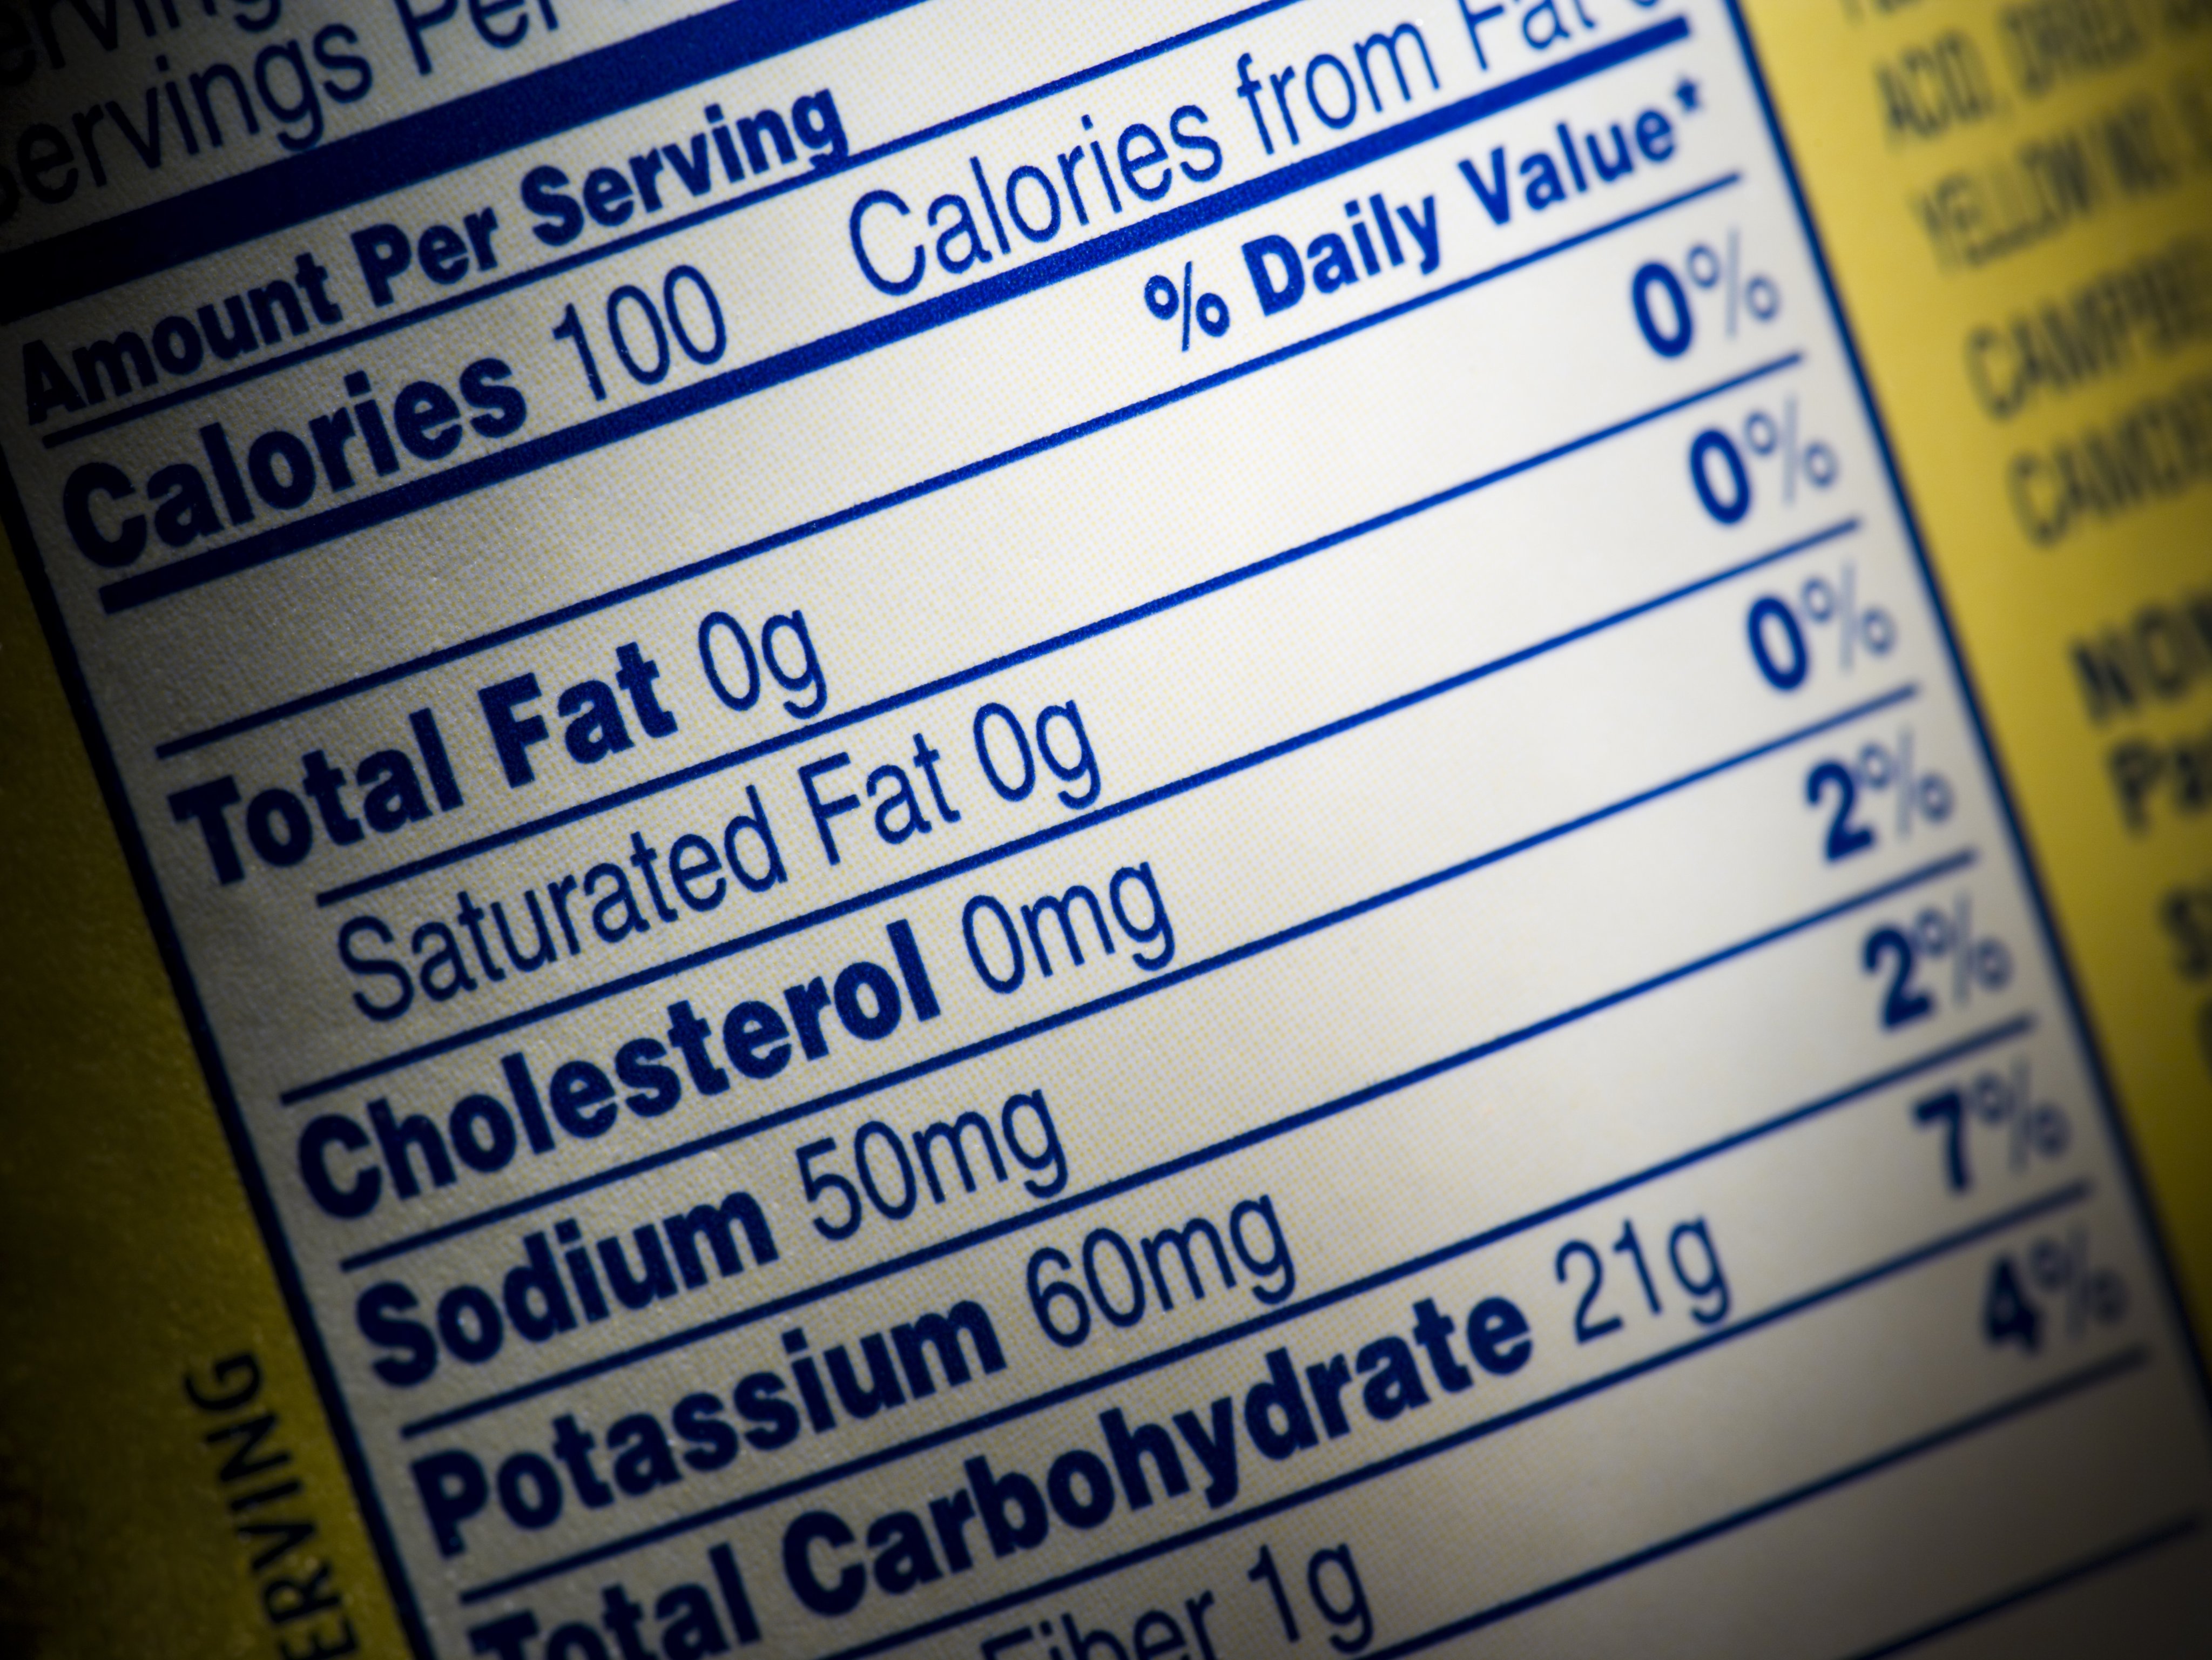 Can You Trust the Nutrition Facts?